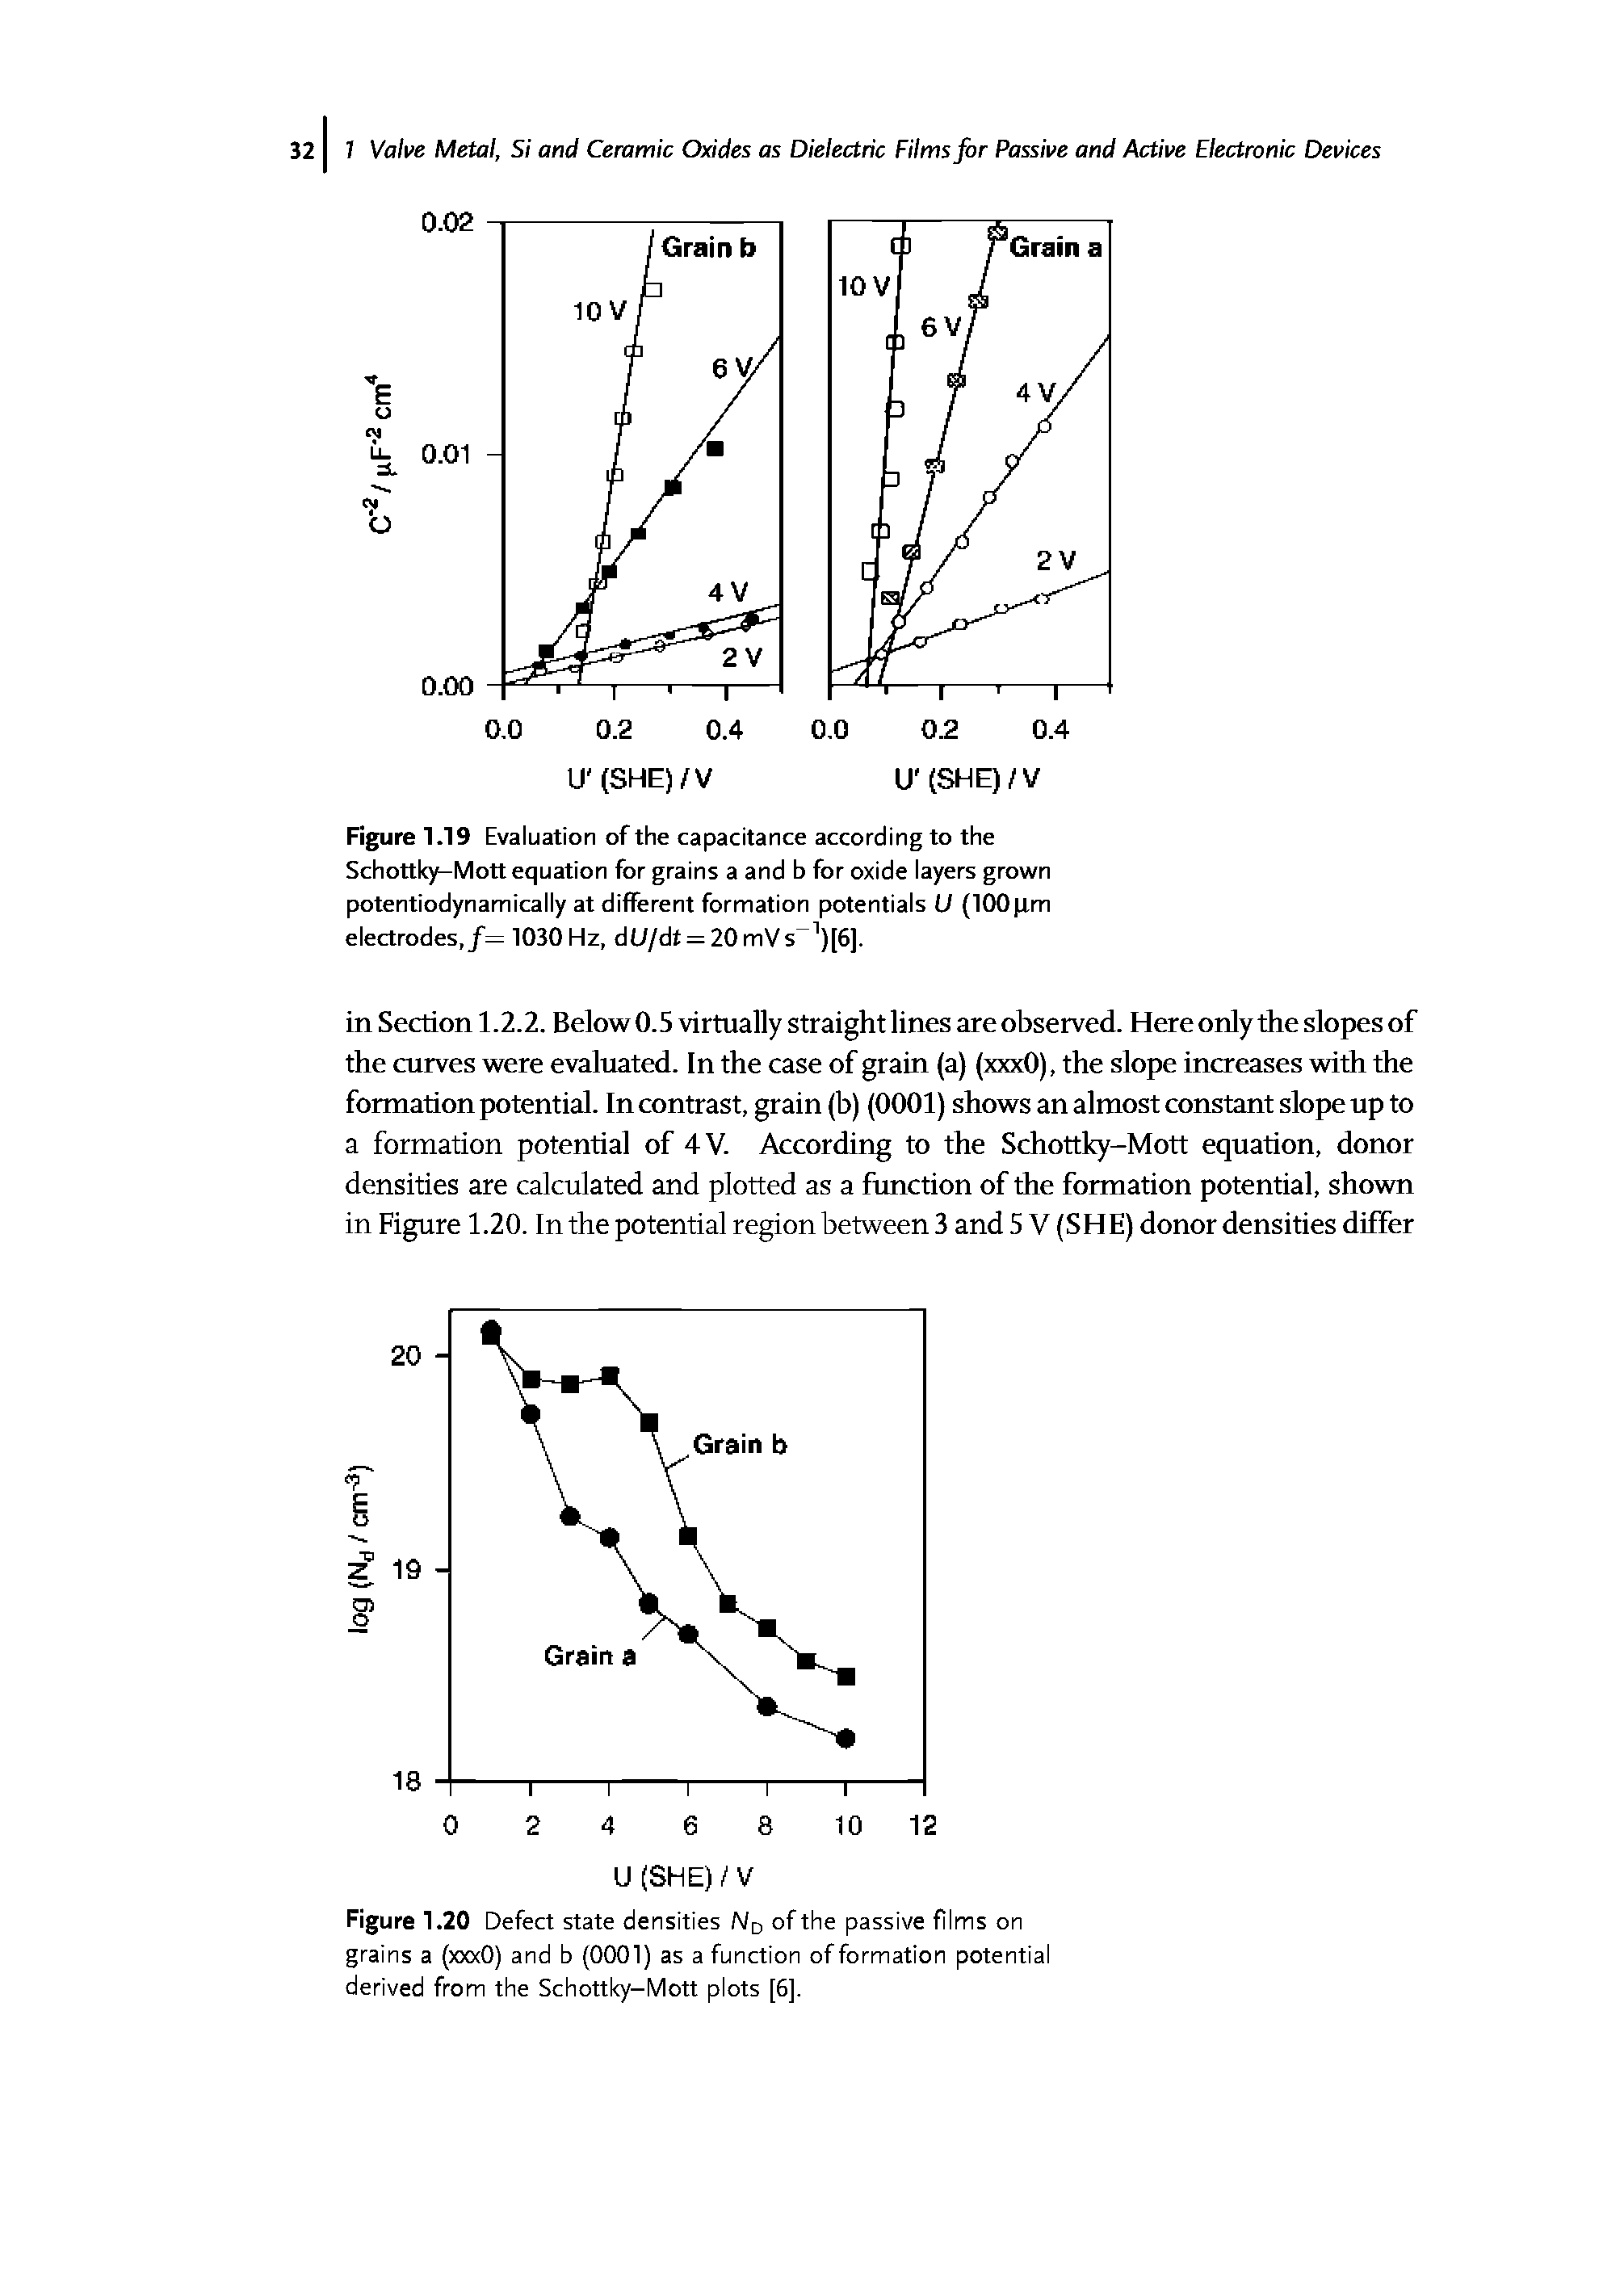 Figure 1.19 Evaluation of the capacitance according to the Schottky-Mott equation for grains a and b for oxide layers grown potentiodynamically at different formation potentials U (100 pm electrodes, f= 1030 Hz, dU/dt —20mVs 1)[6].